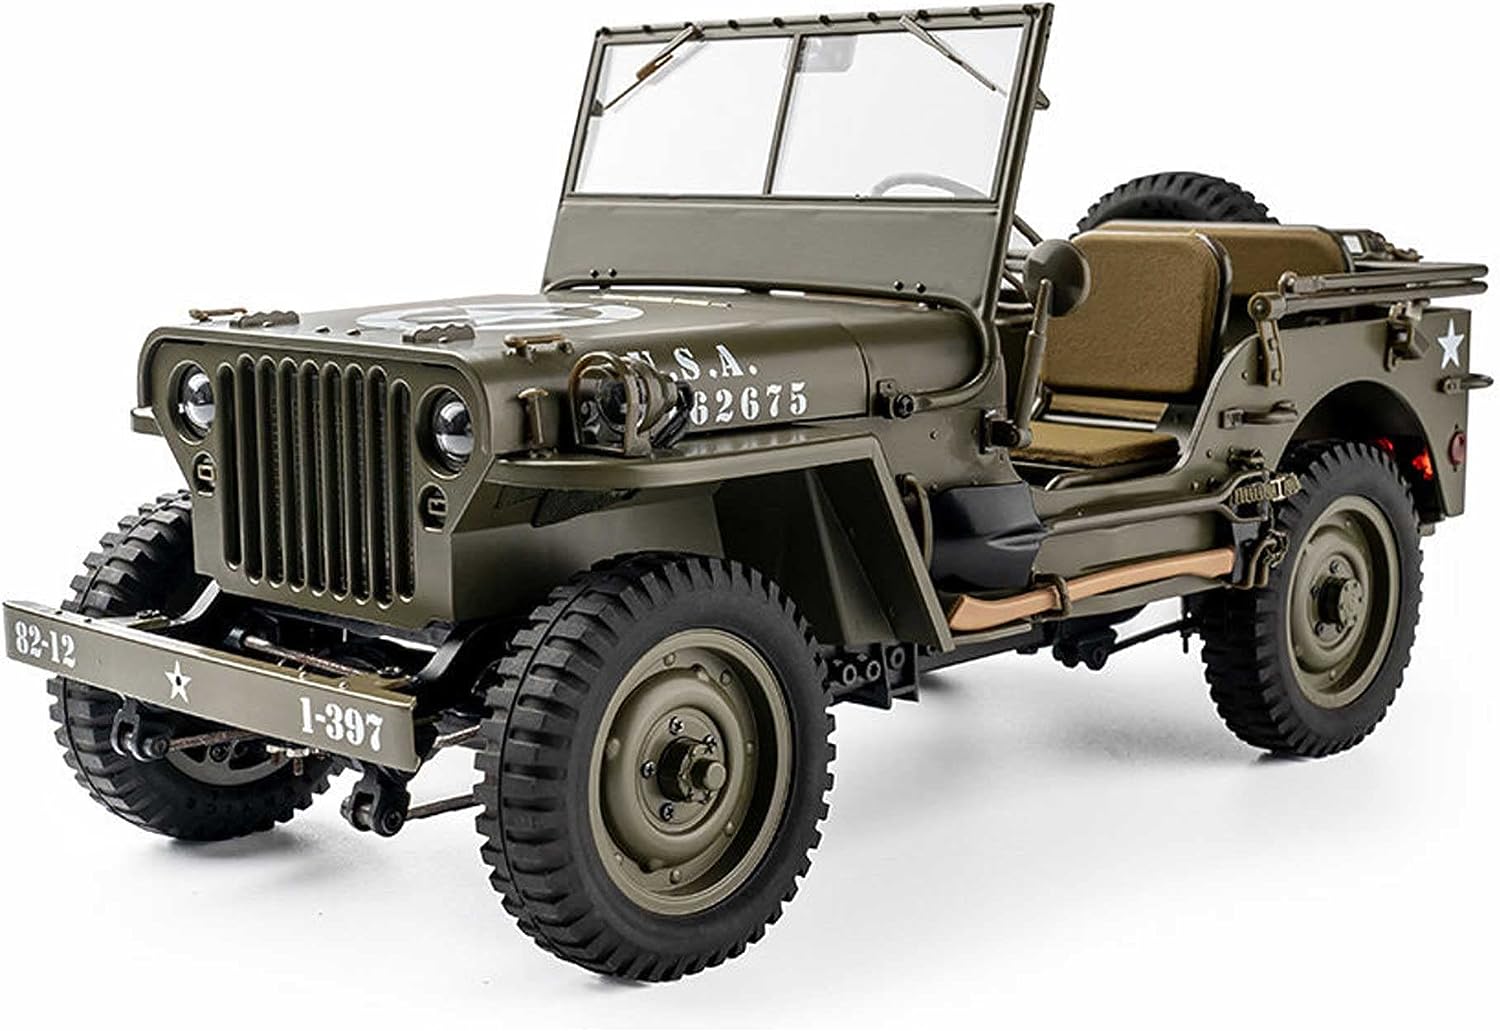 FMS Rochobby RC Car 112 1941 MB Scaler Willys Jeep Remote Control Crawler Military Truck 4x4 Offroad Vehicle with Transmitter Battery and Charger